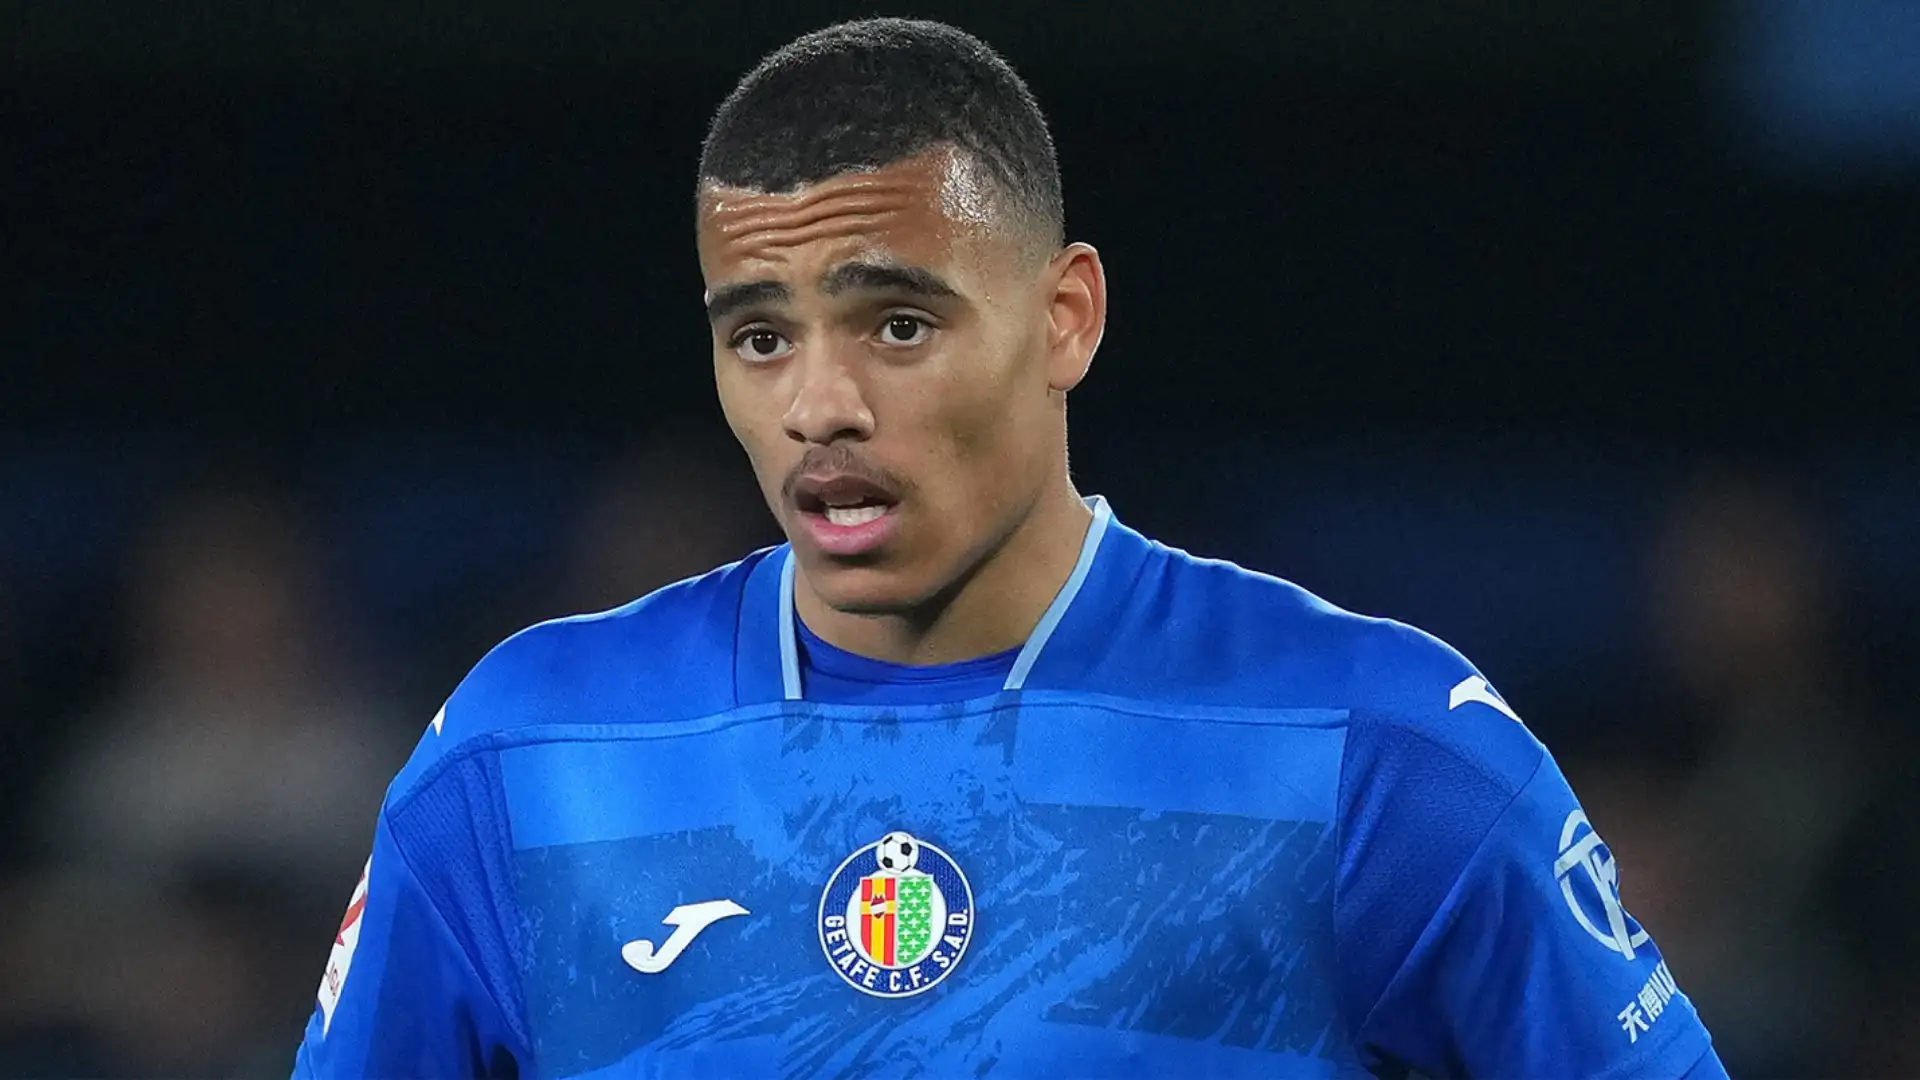 Getafe lining up Mason Greenwood replacement as transfer race hots up for Man Utd forward